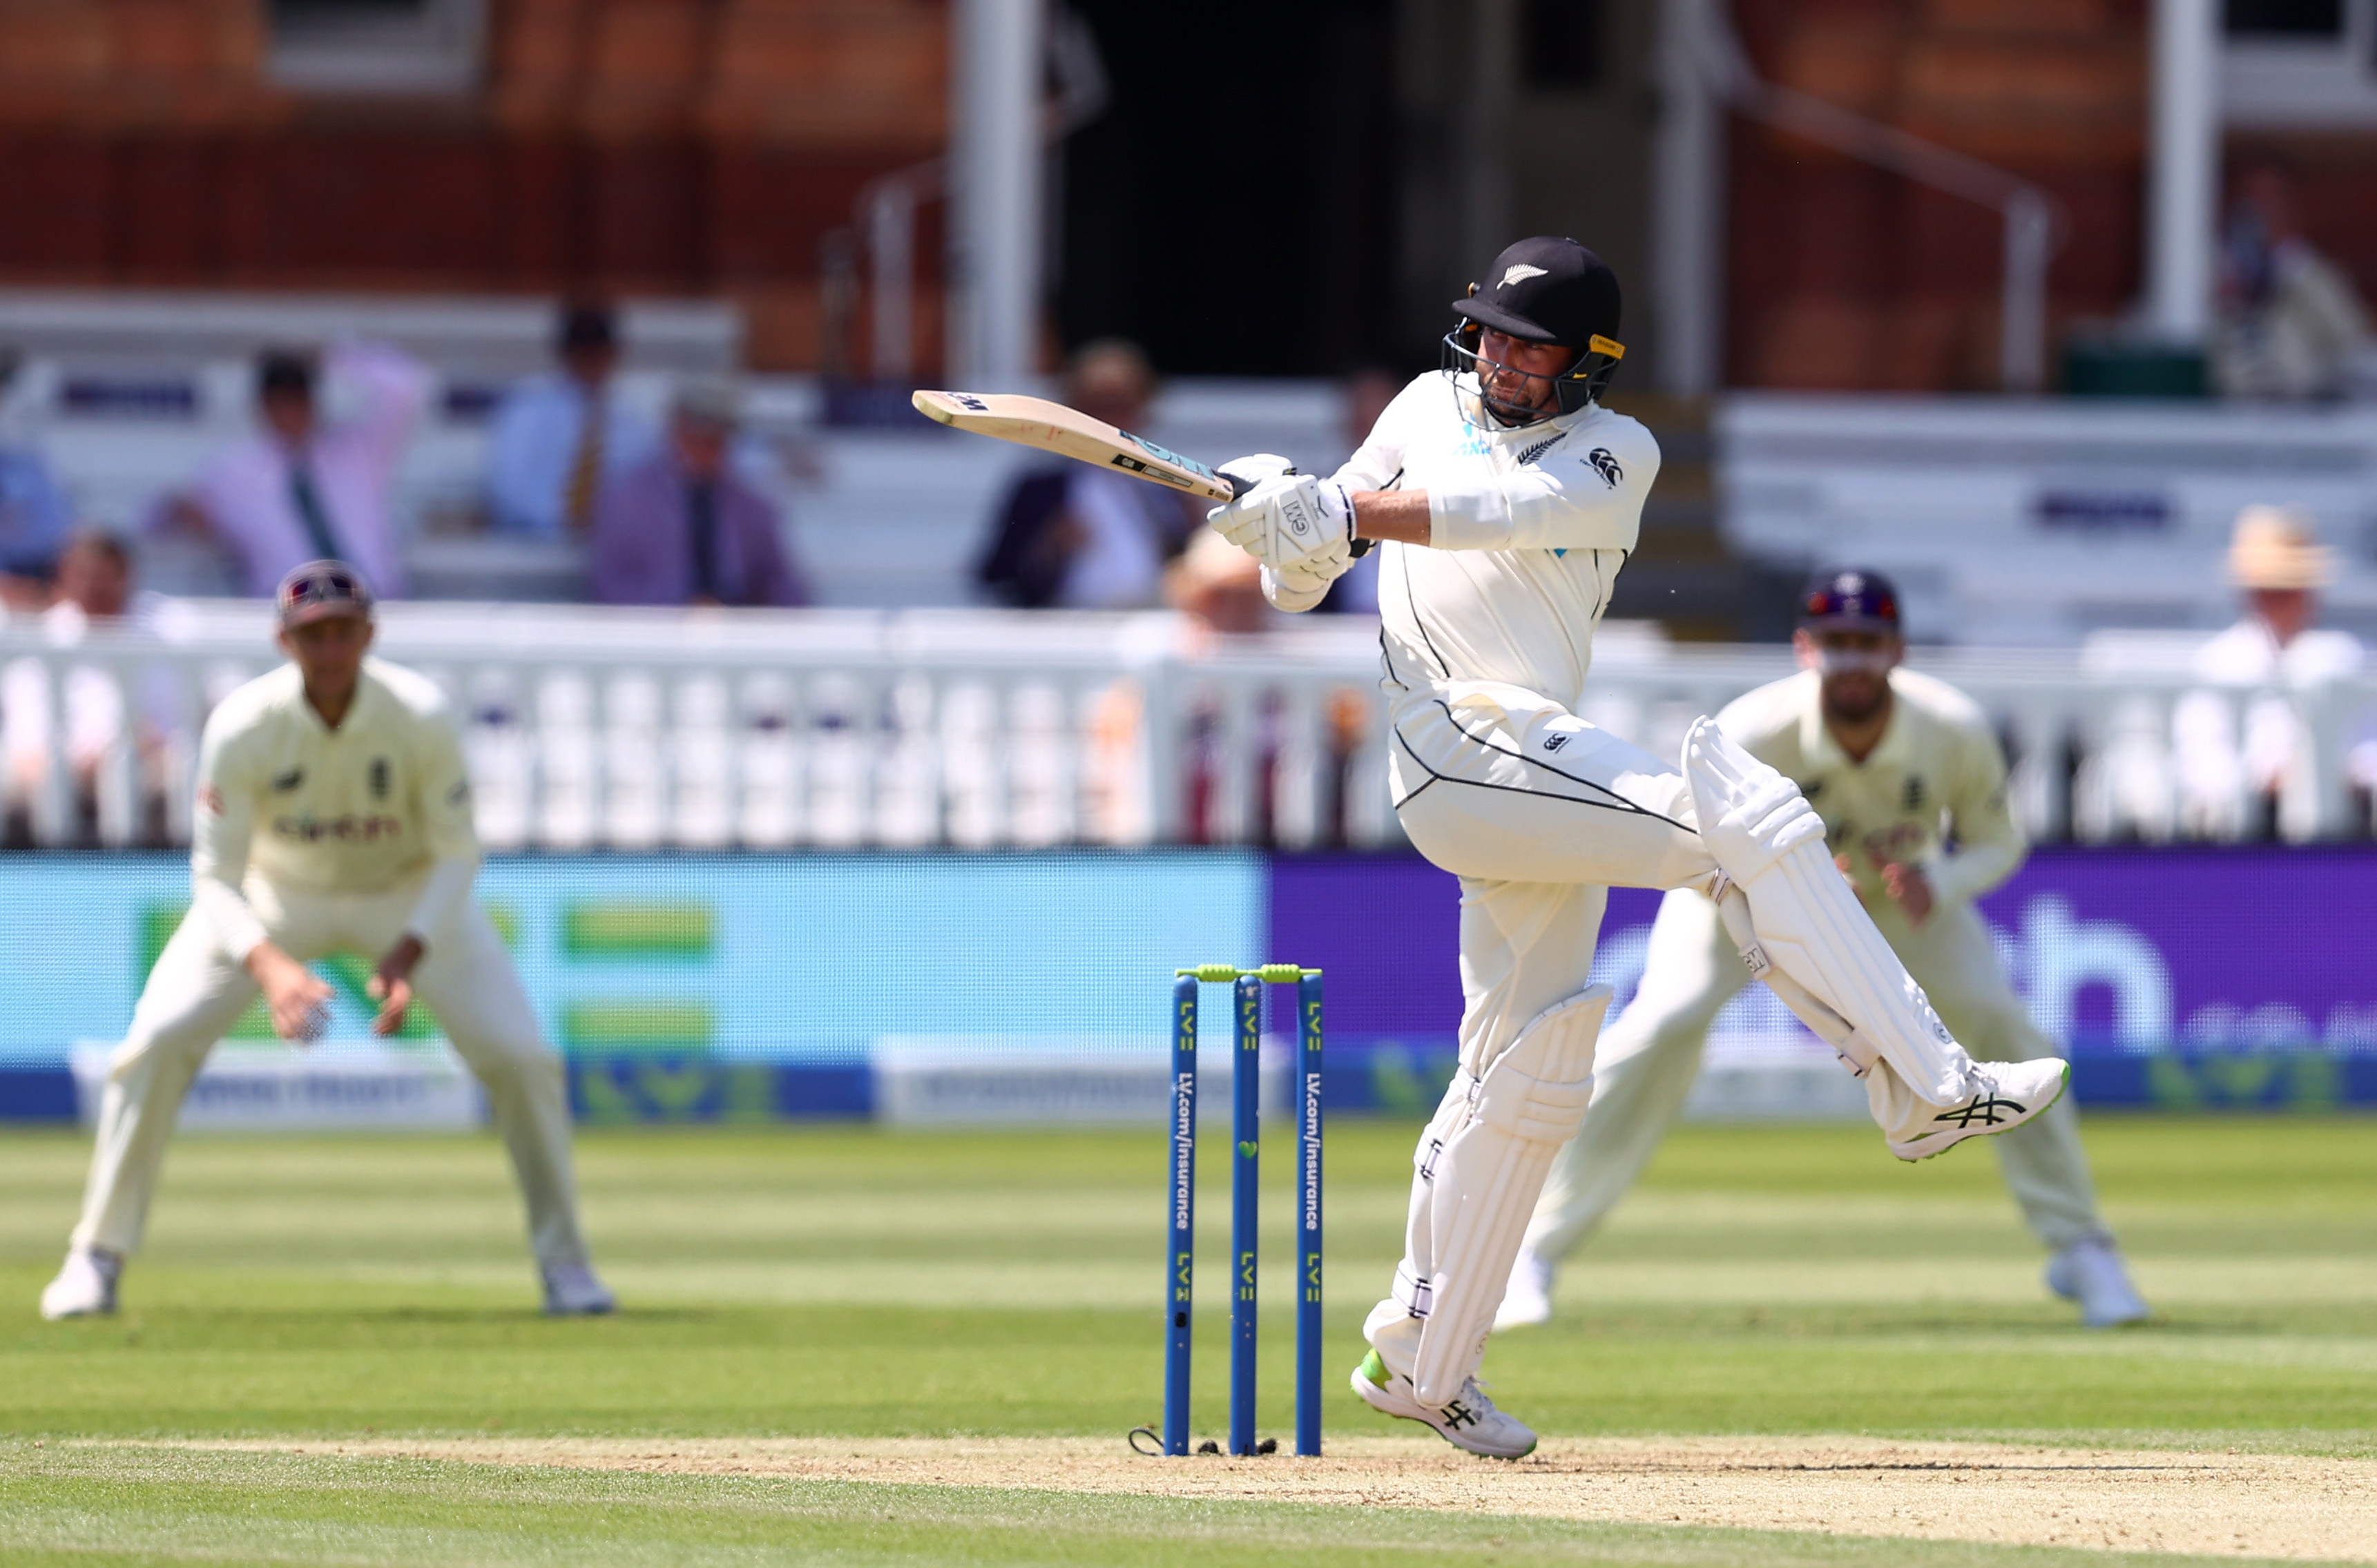 ENG vs NZ | Lord’s Day 1 Talking Points: Devon Conway’s breezy debut and Mark Wood's struggle at home